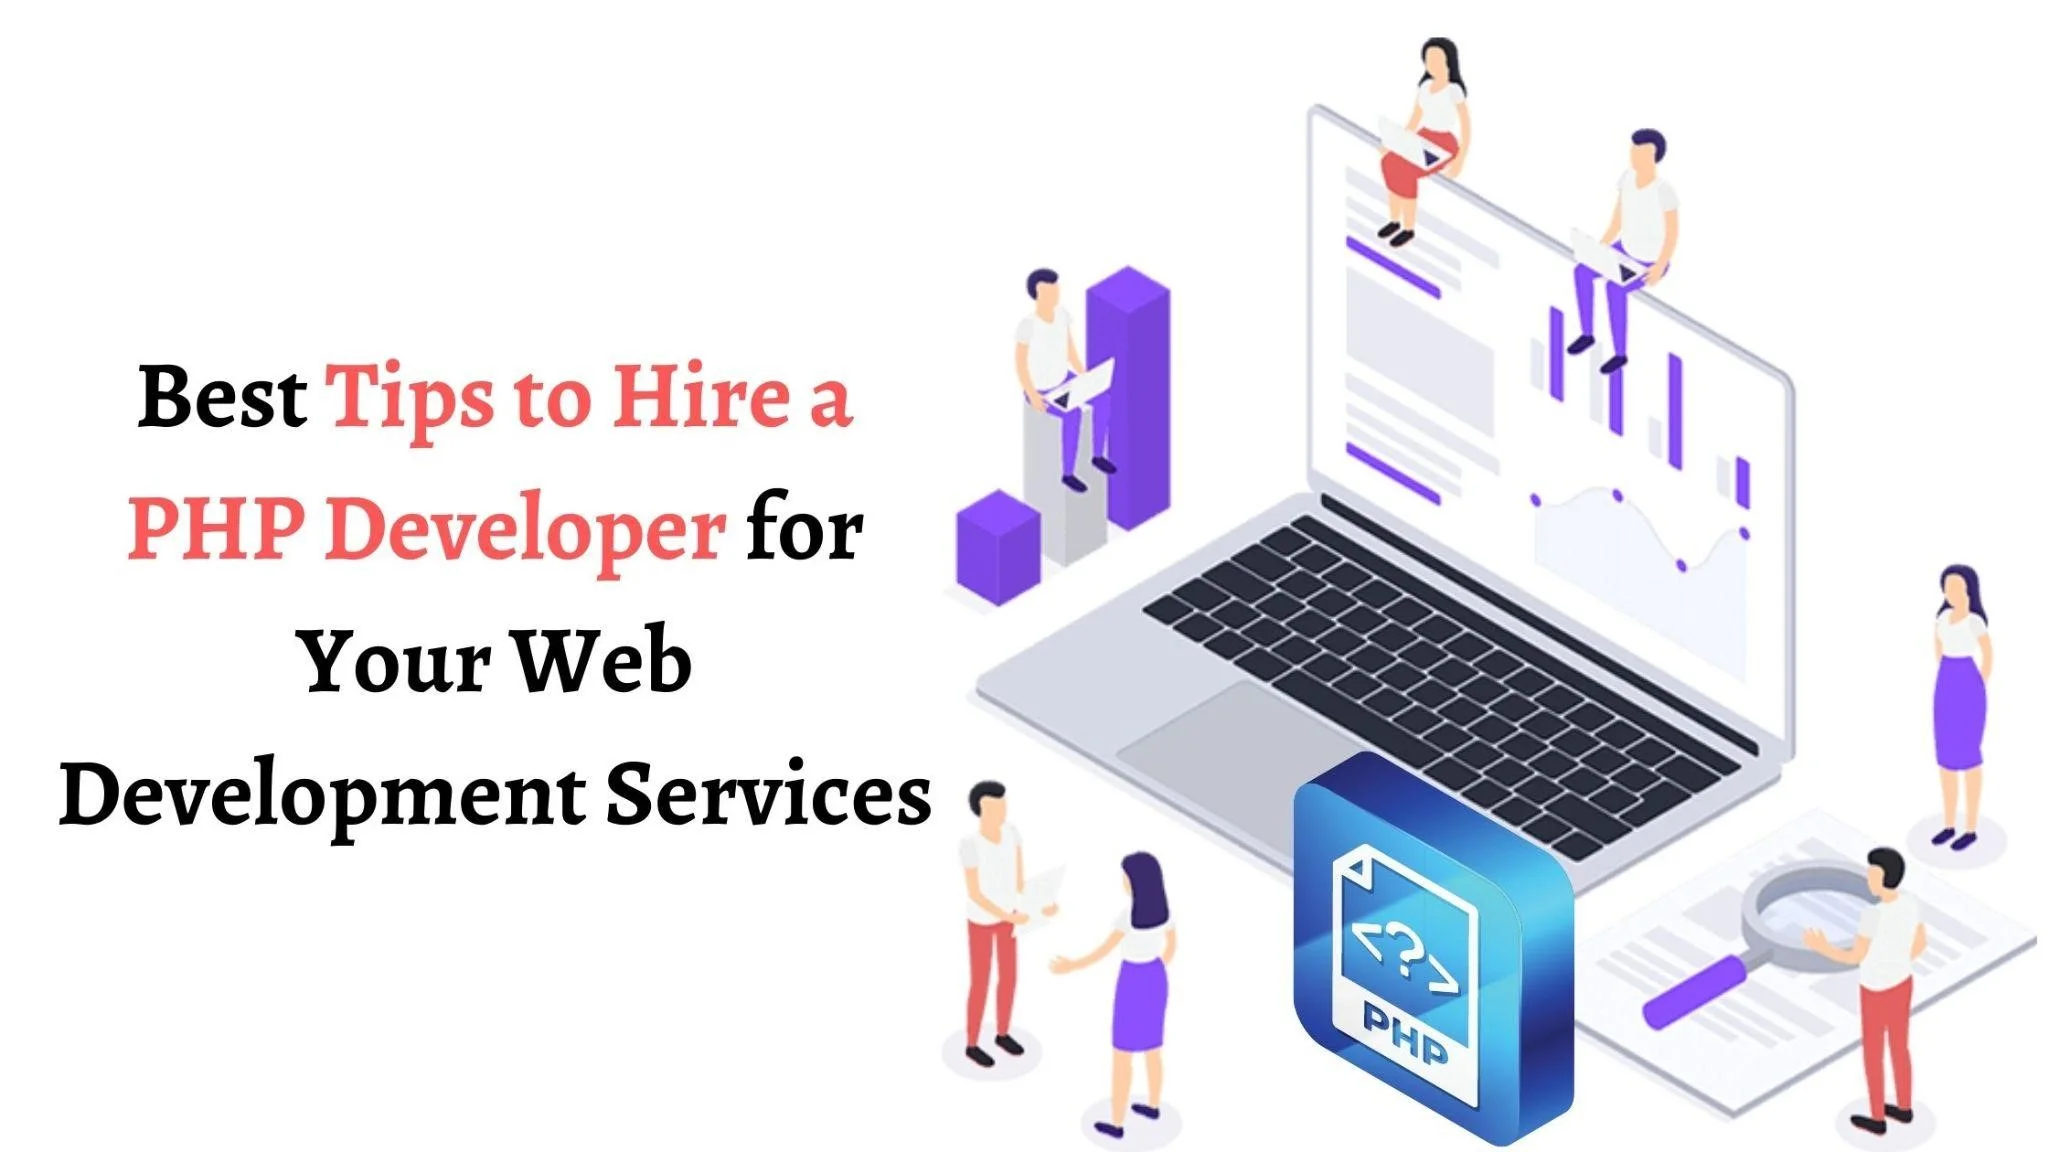 Best tips to hire a PHP developer for your web development services